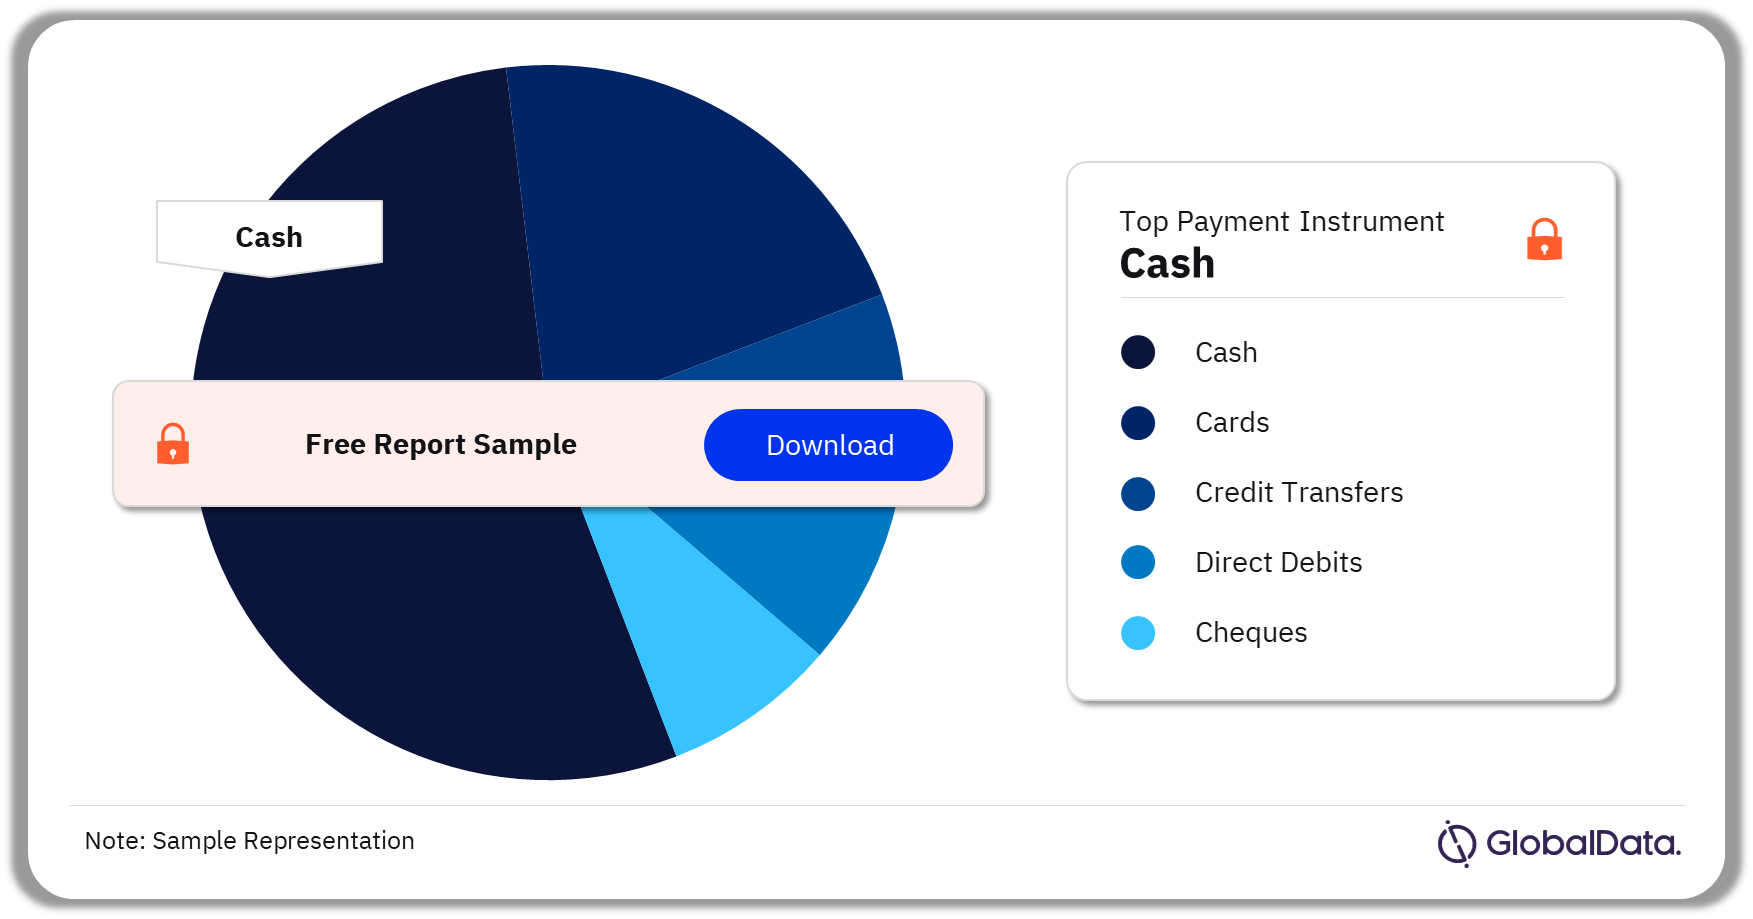 Mexico Cards and Payments Market Analysis by Payment Instruments, 2023 (%)